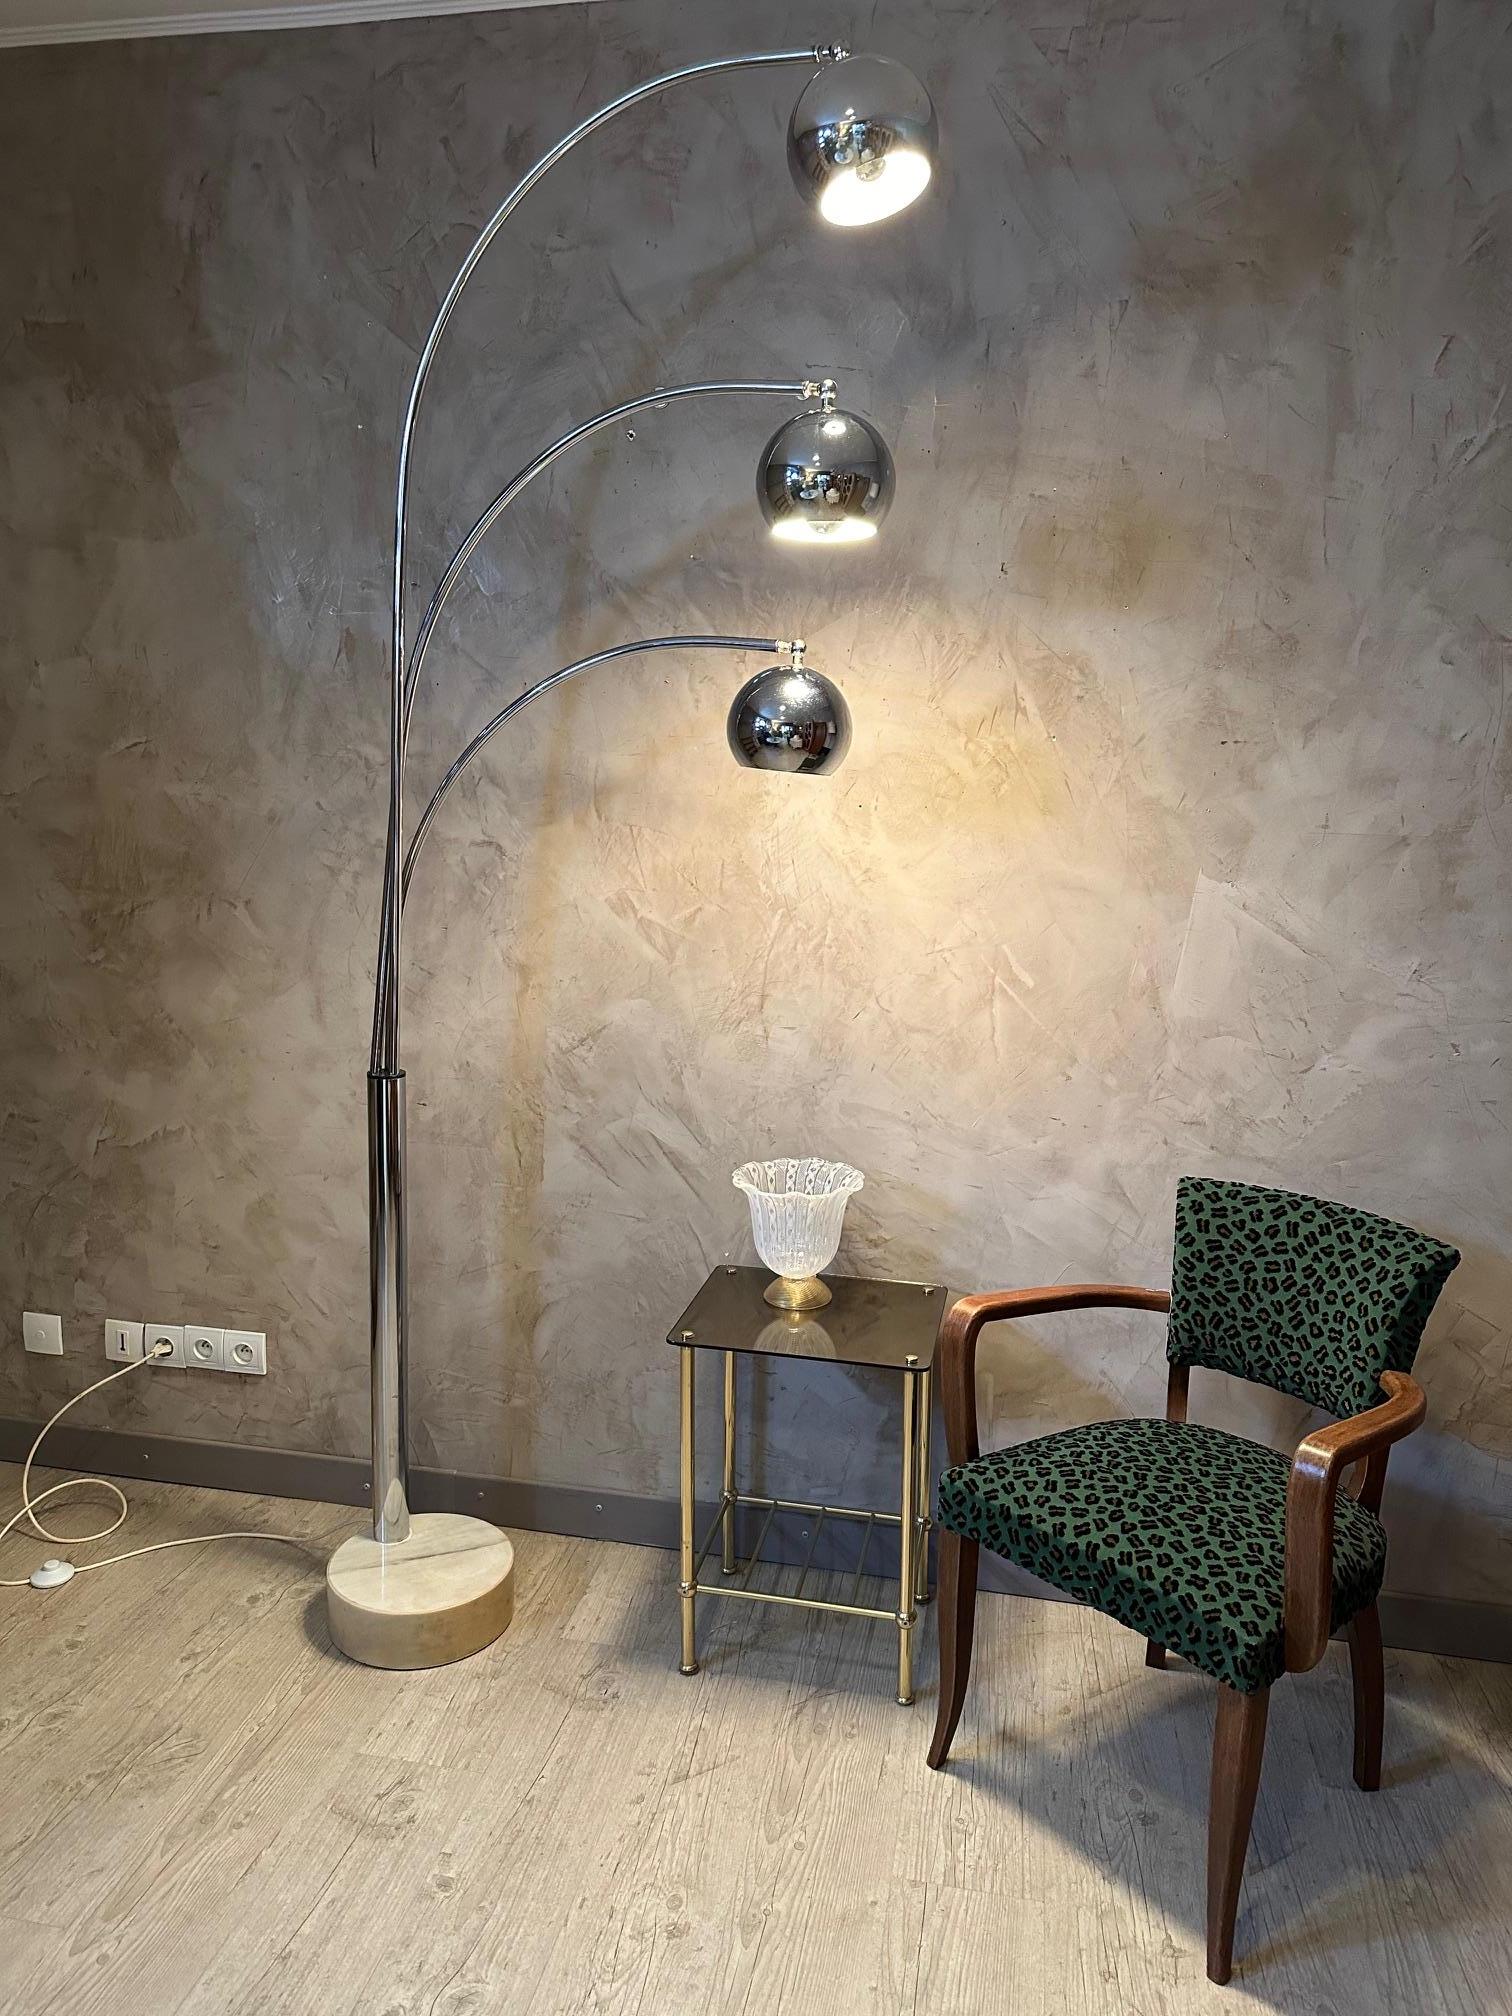 Mid-century Goffredo Reggiani Chromed Metal and Marble Floor Lamp, 1960s For Sale 7